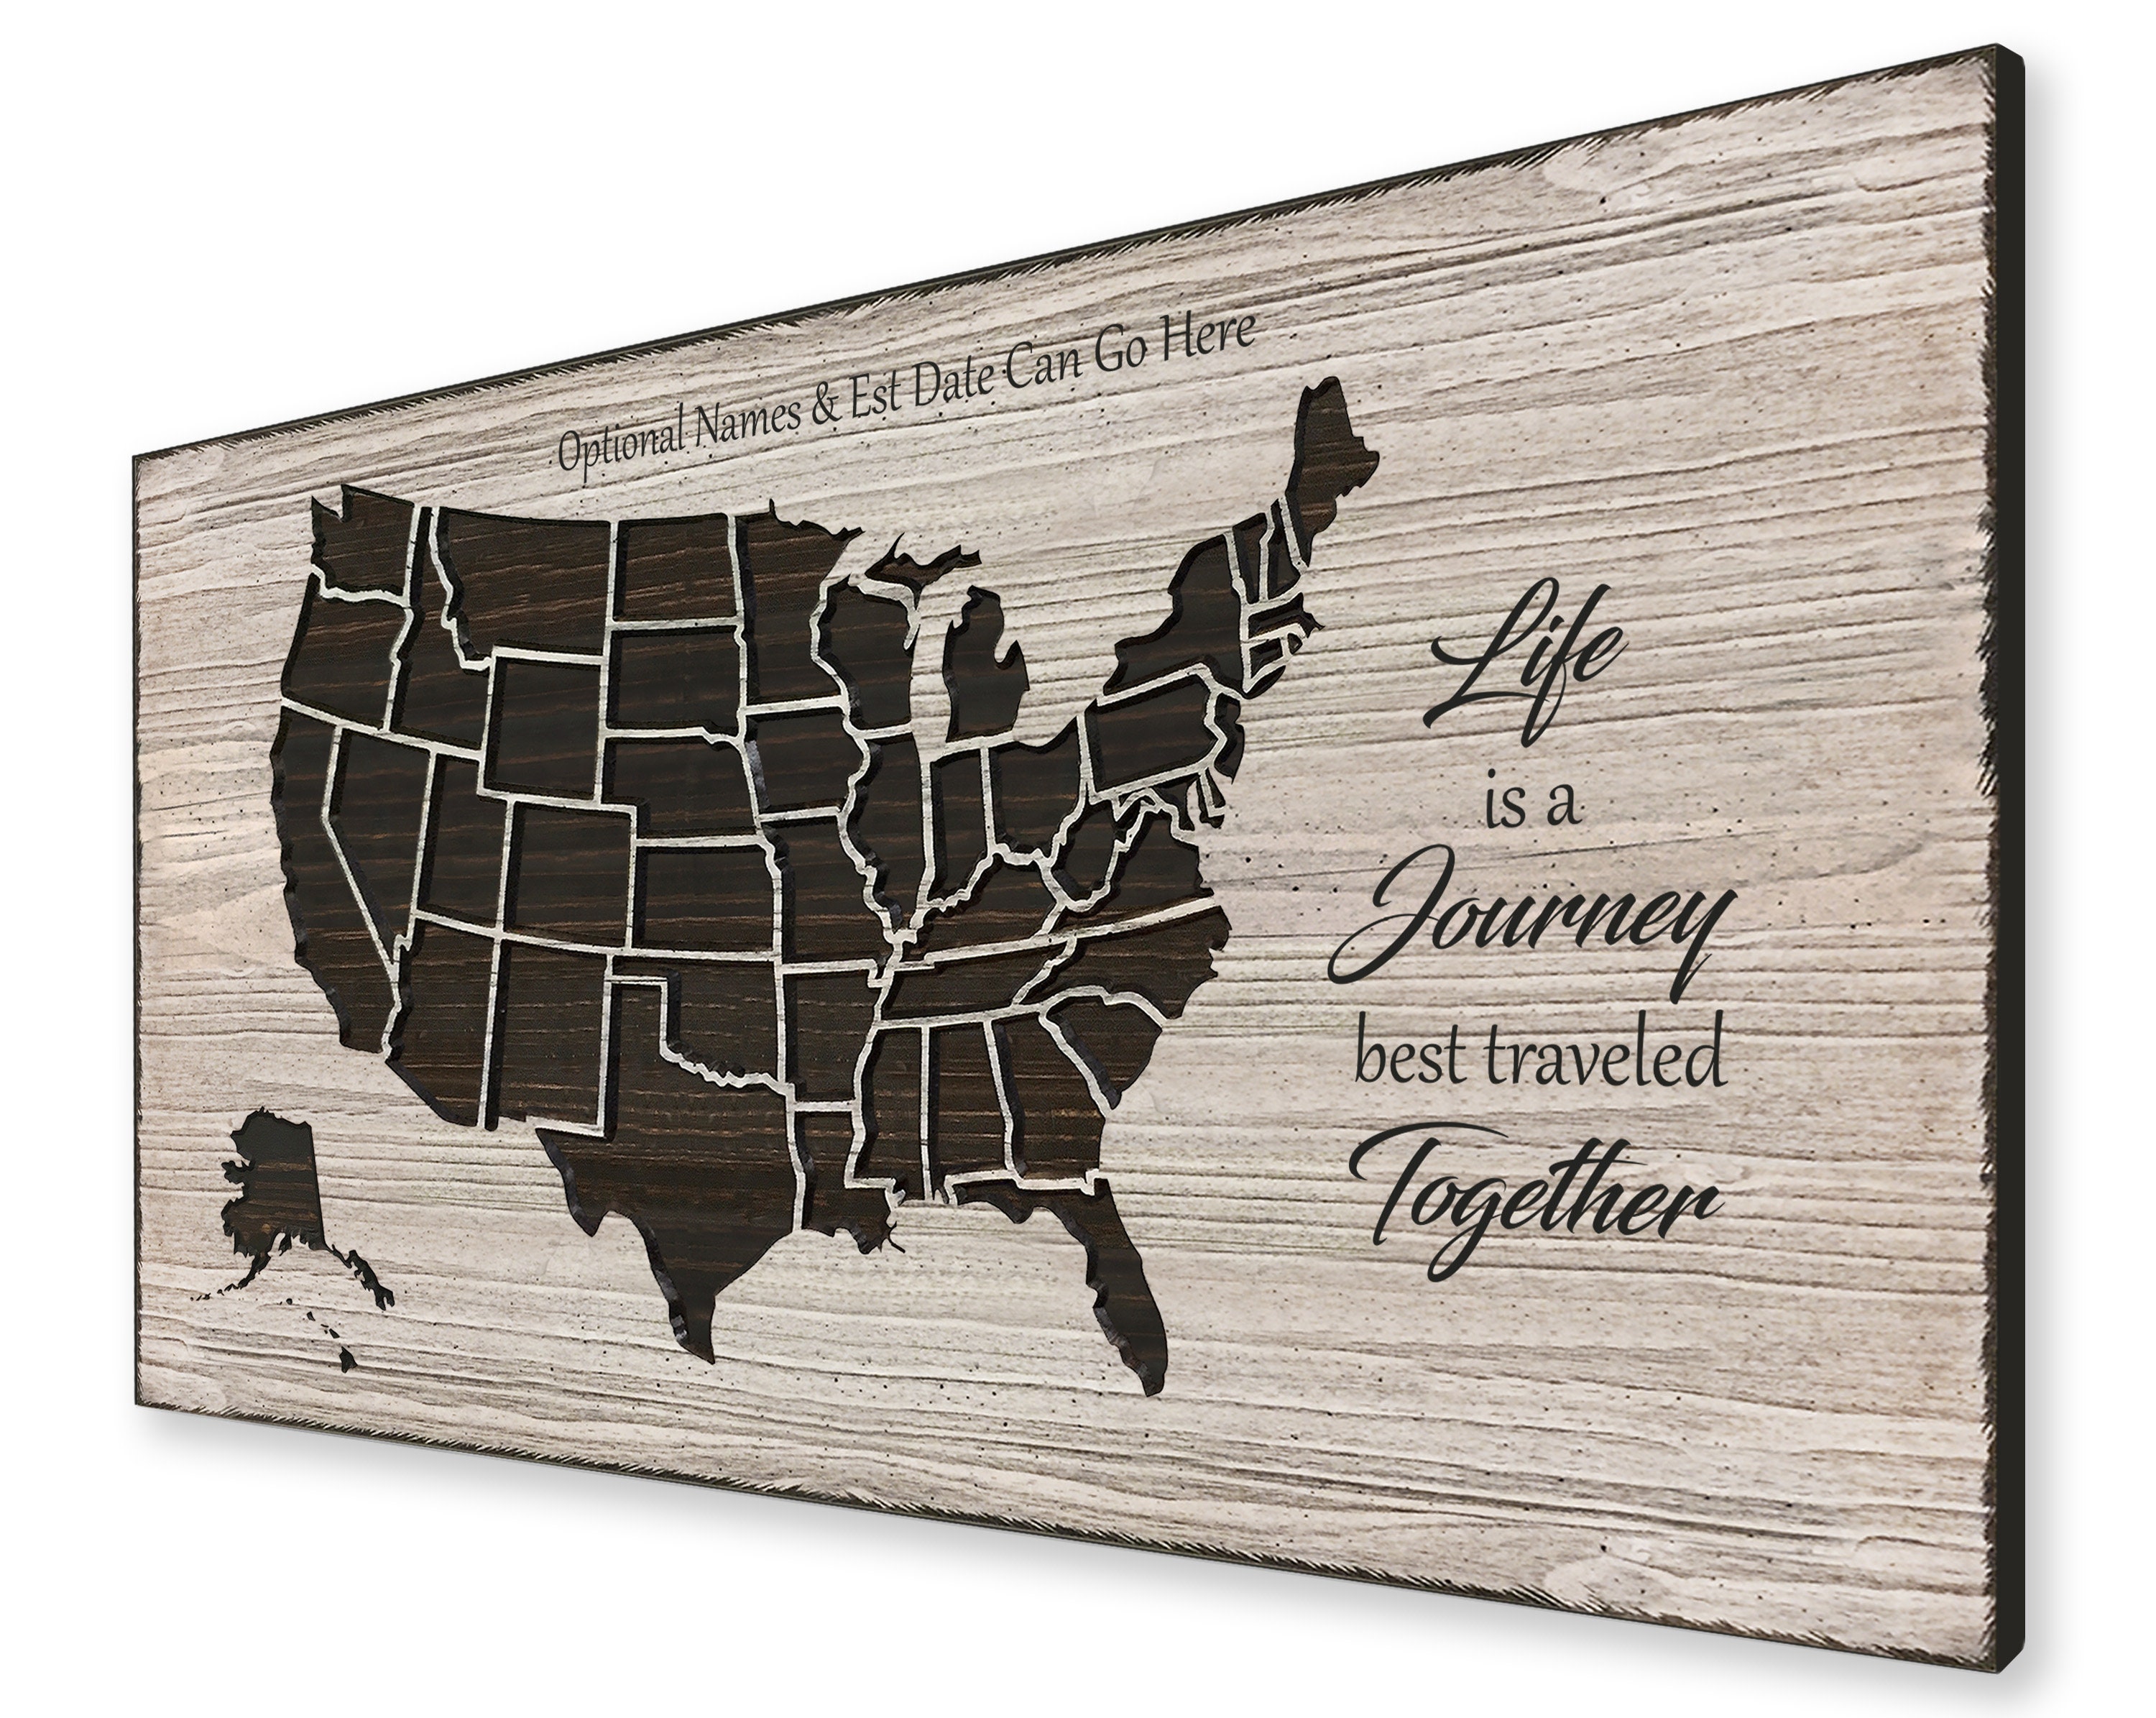 Map Of The United States America, Wood Wall Art Us Home Decor, Customized, Personalized, Unique Gift Idea, Travel, Adventure